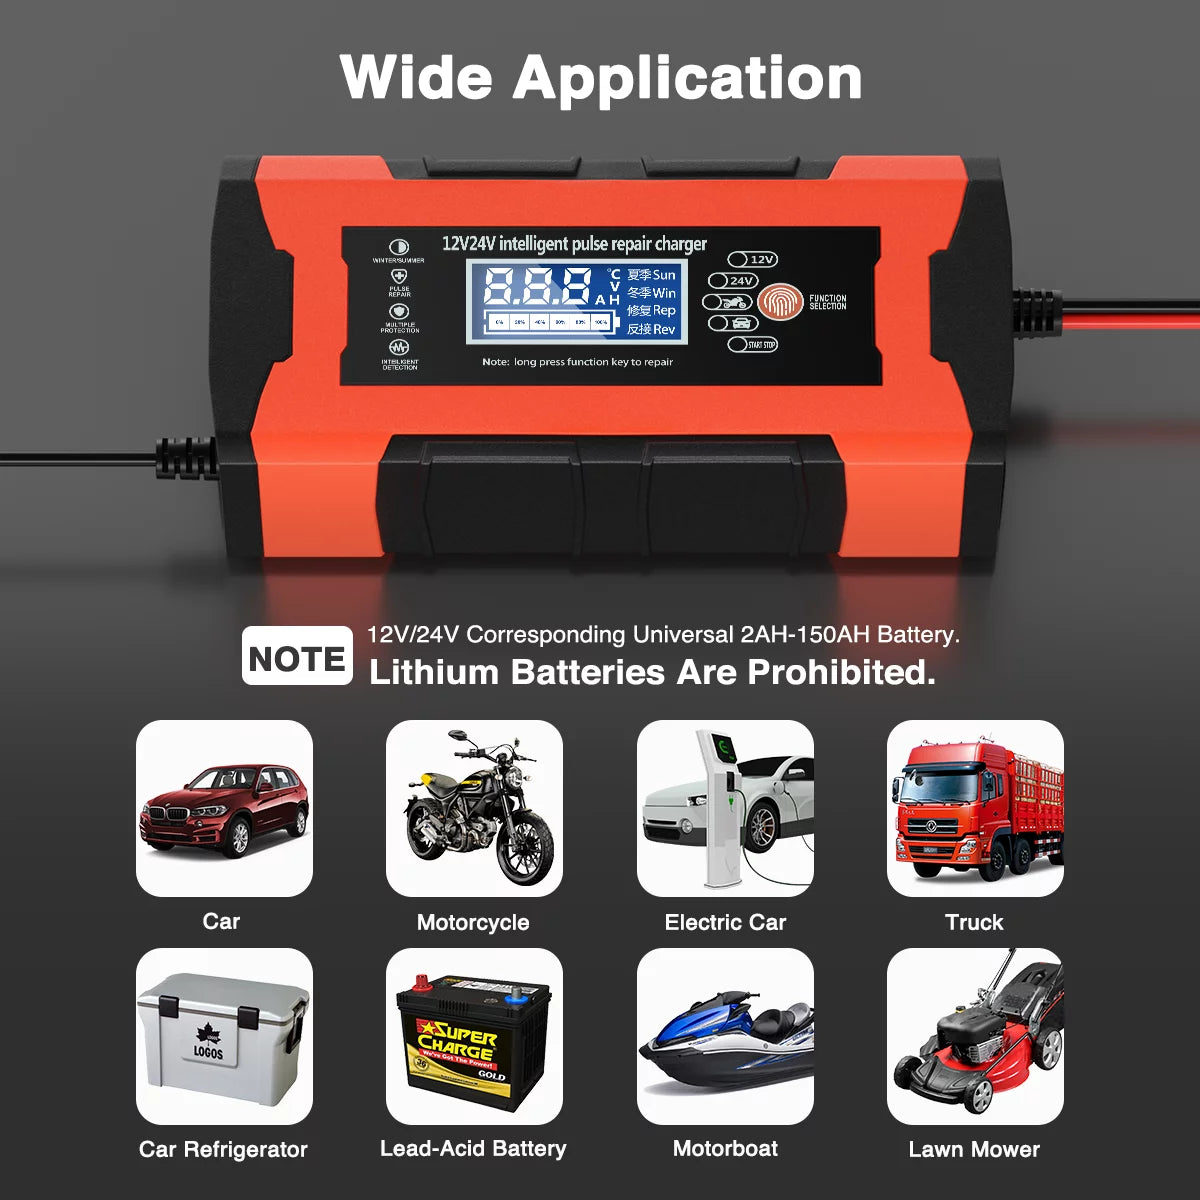 10-Amp Car Battery Charger, 12V 24V Automatic Smart Battery Maintainer Trickle Charger, Battery Charger Battery Desulfator with Temp Compensation for Car Truck Motorcycle Lawn Mower Lead Acid Battery